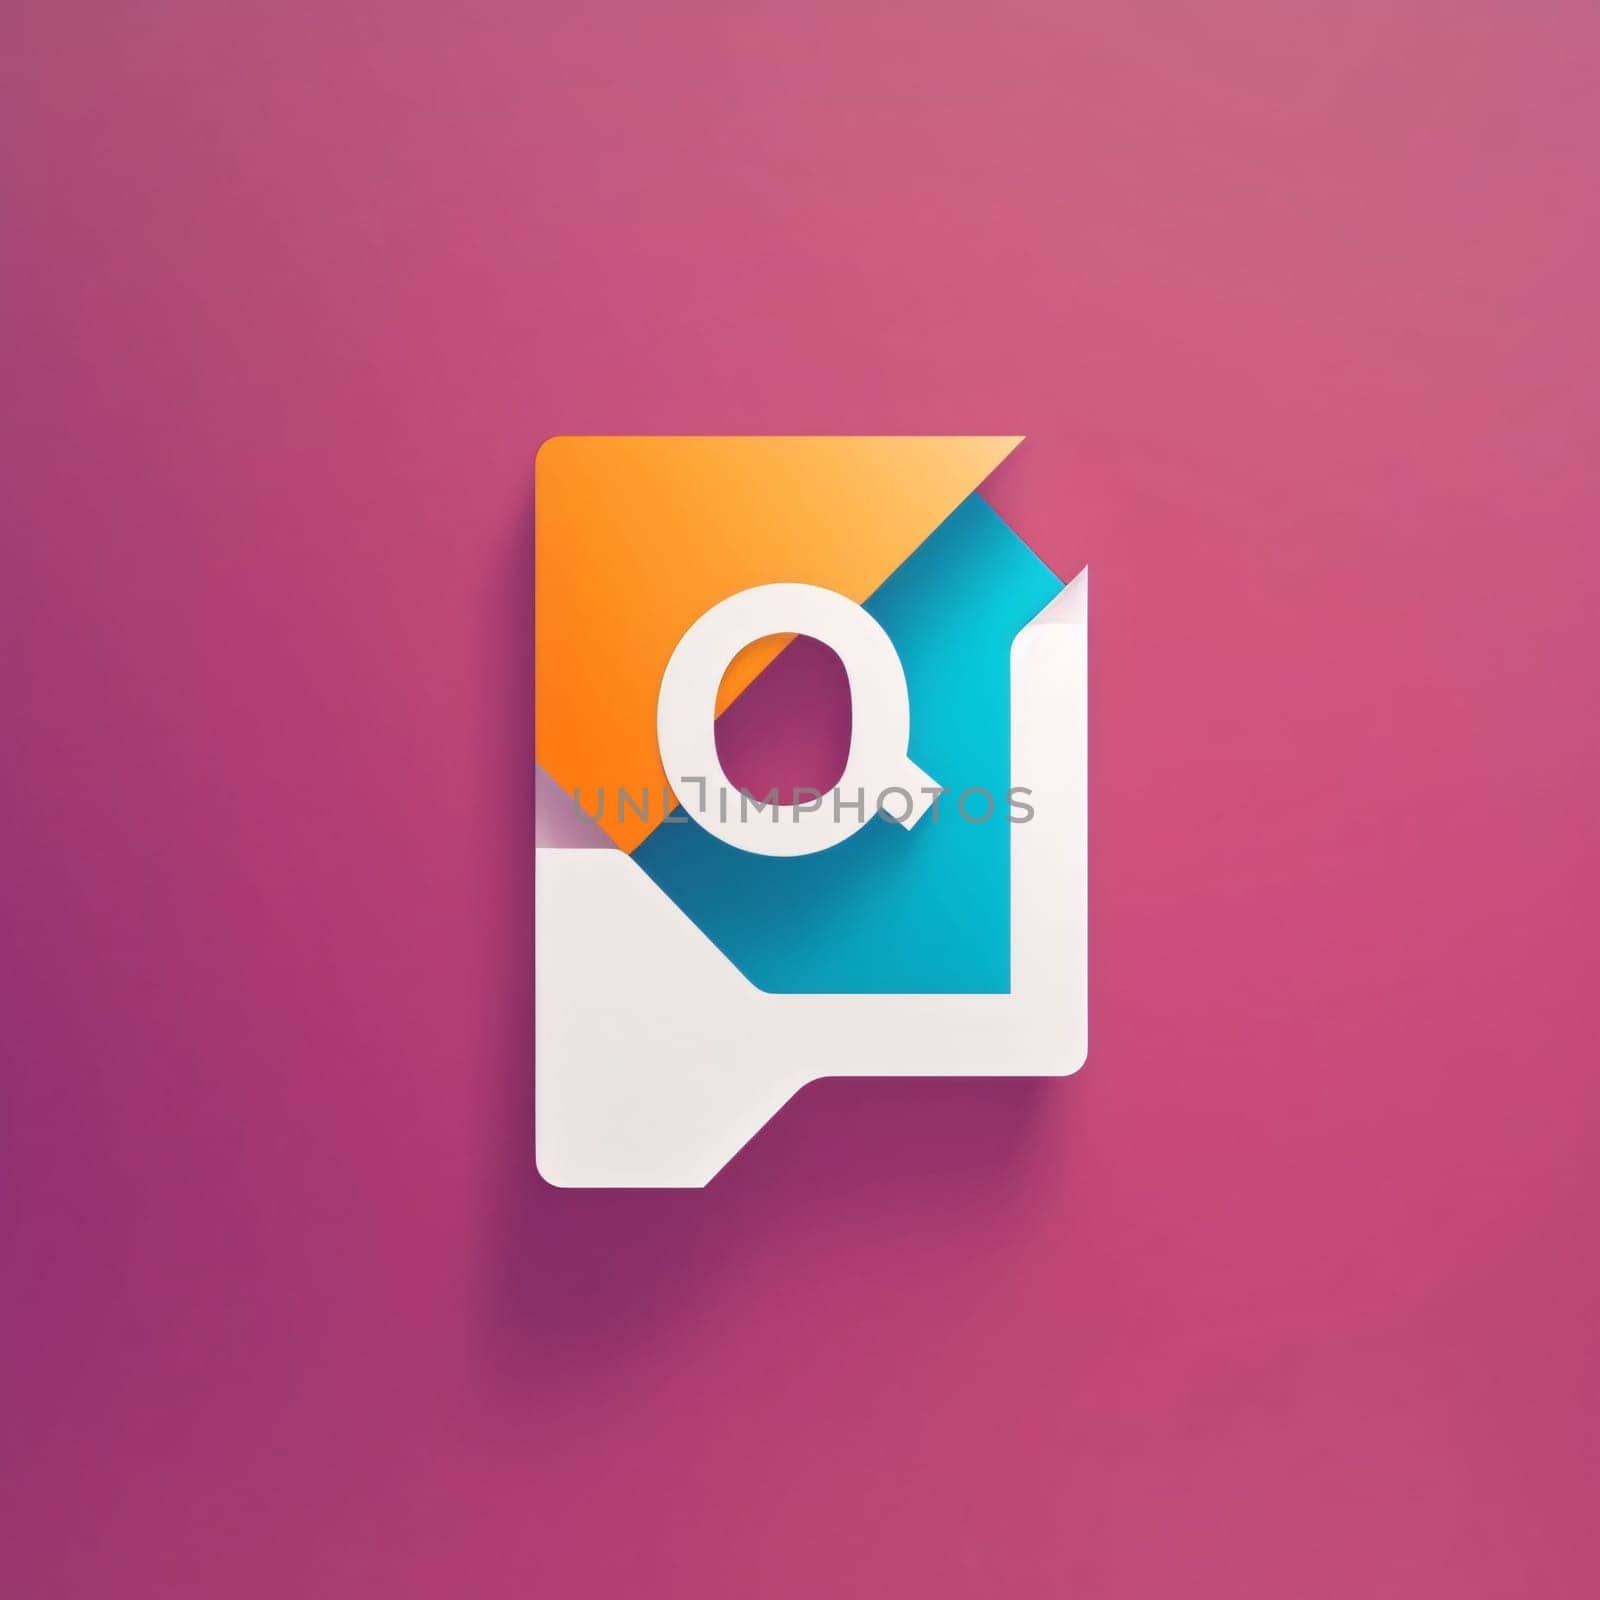 Search magnifier web icon, vector illustration. Flat design style. letter Q by ThemesS